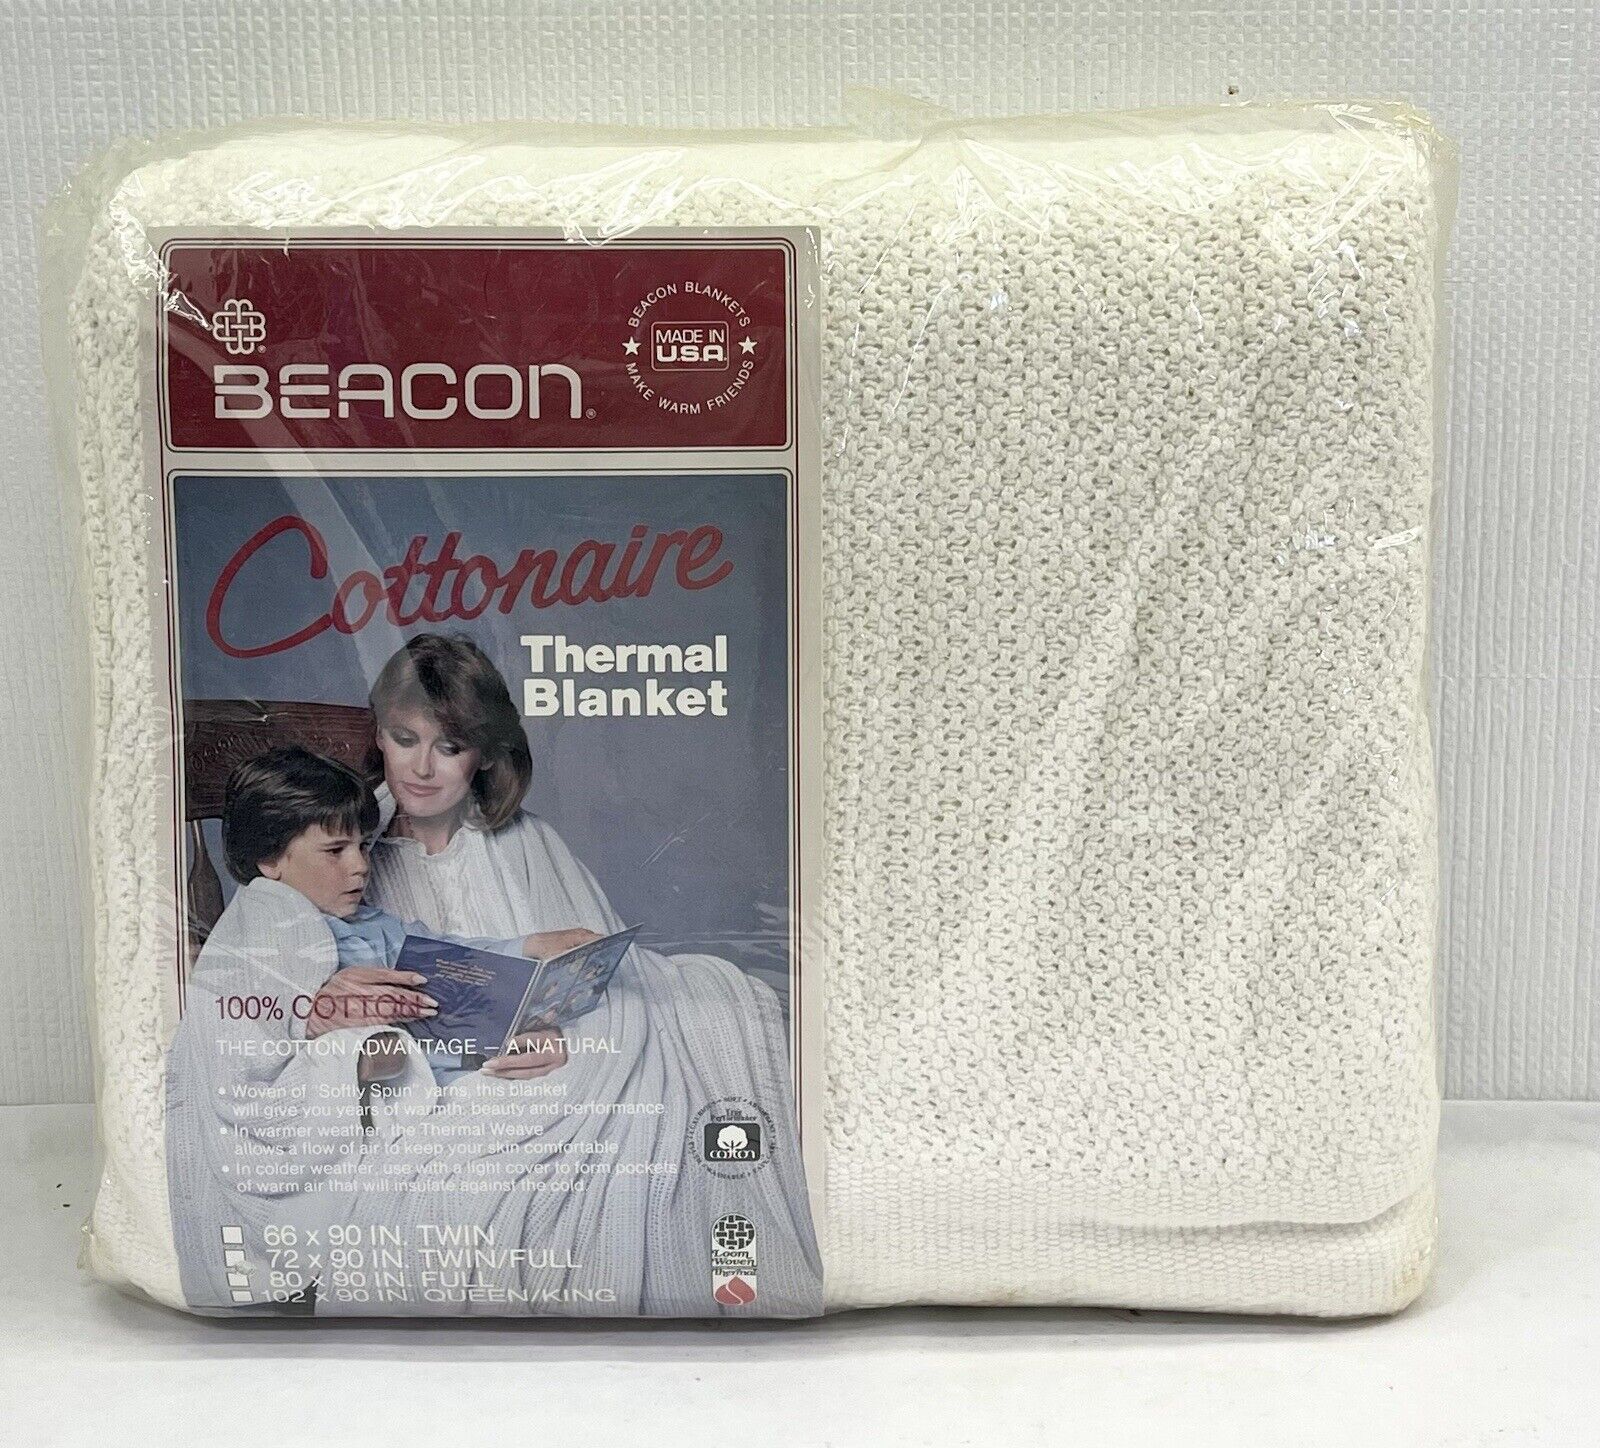 NOS Beacon Cottonaire White Cotton Thermal Blanket Waffle Weave Twin/Full 72x90